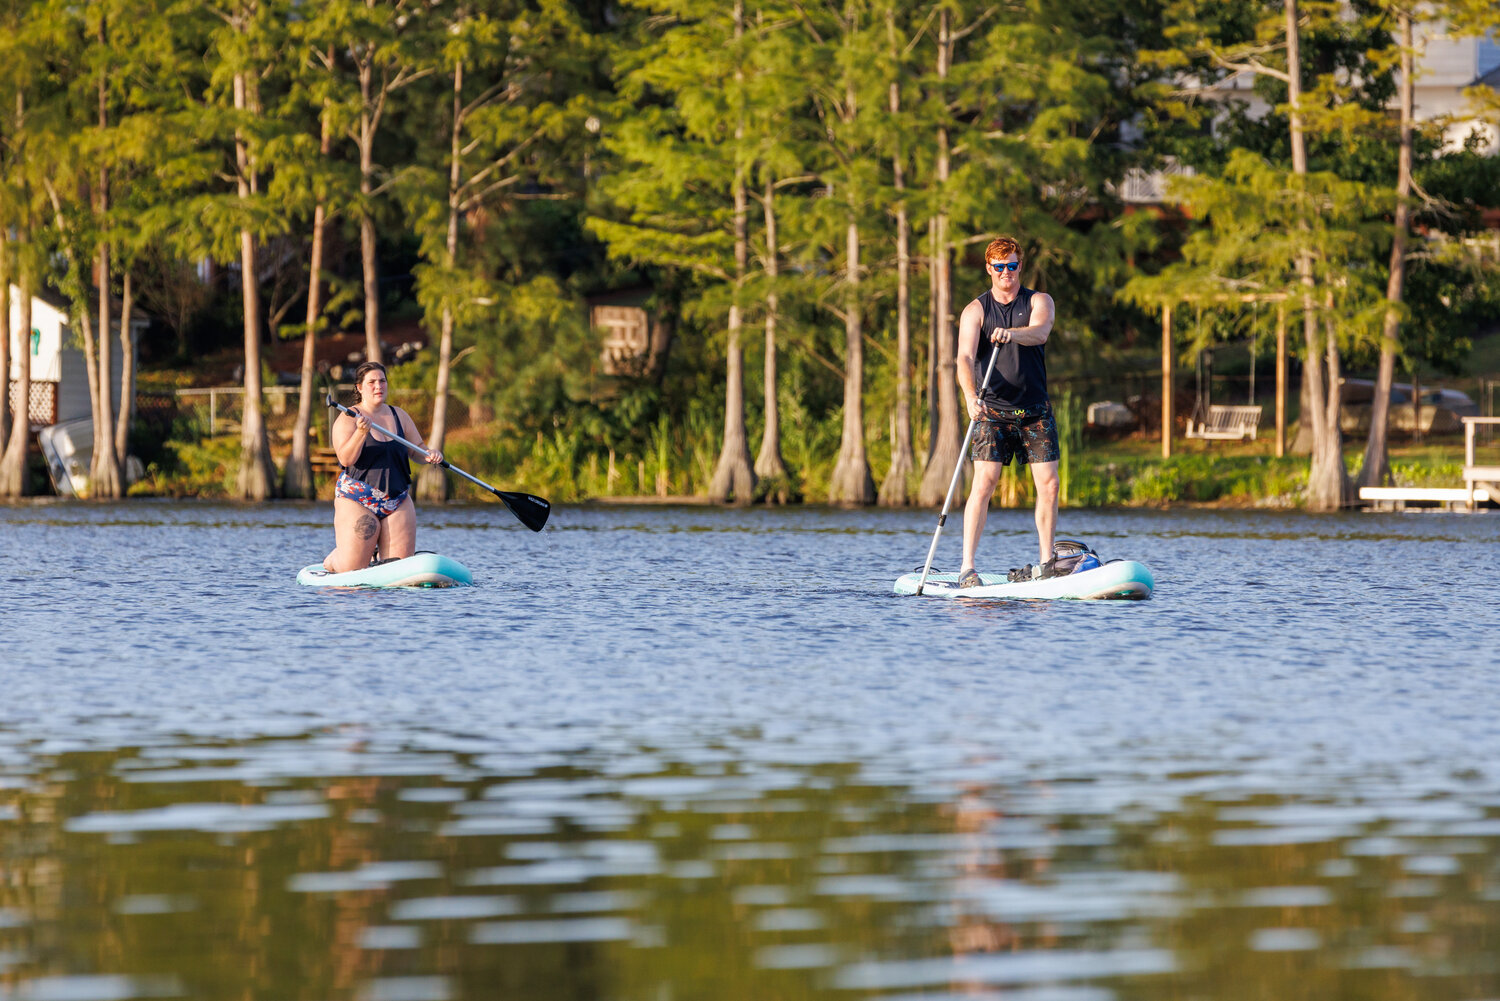 Local paddle boarders visited Hope Mills Lake to cool down as the temperature approached 100 degrees on a recent afternoon.